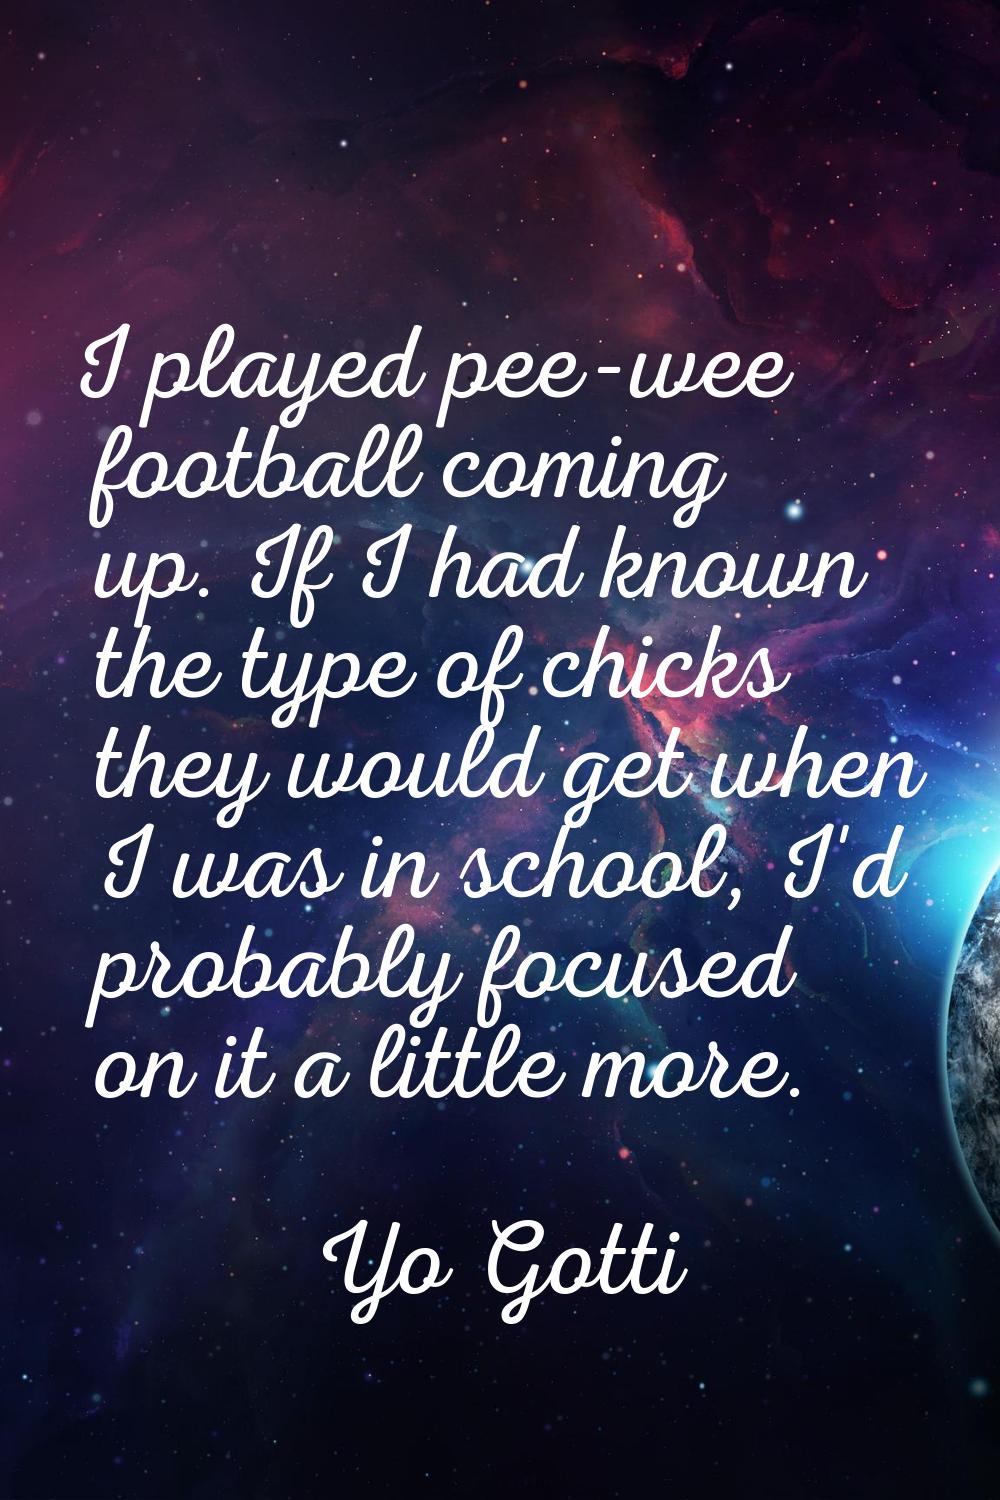 I played pee-wee football coming up. If I had known the type of chicks they would get when I was in